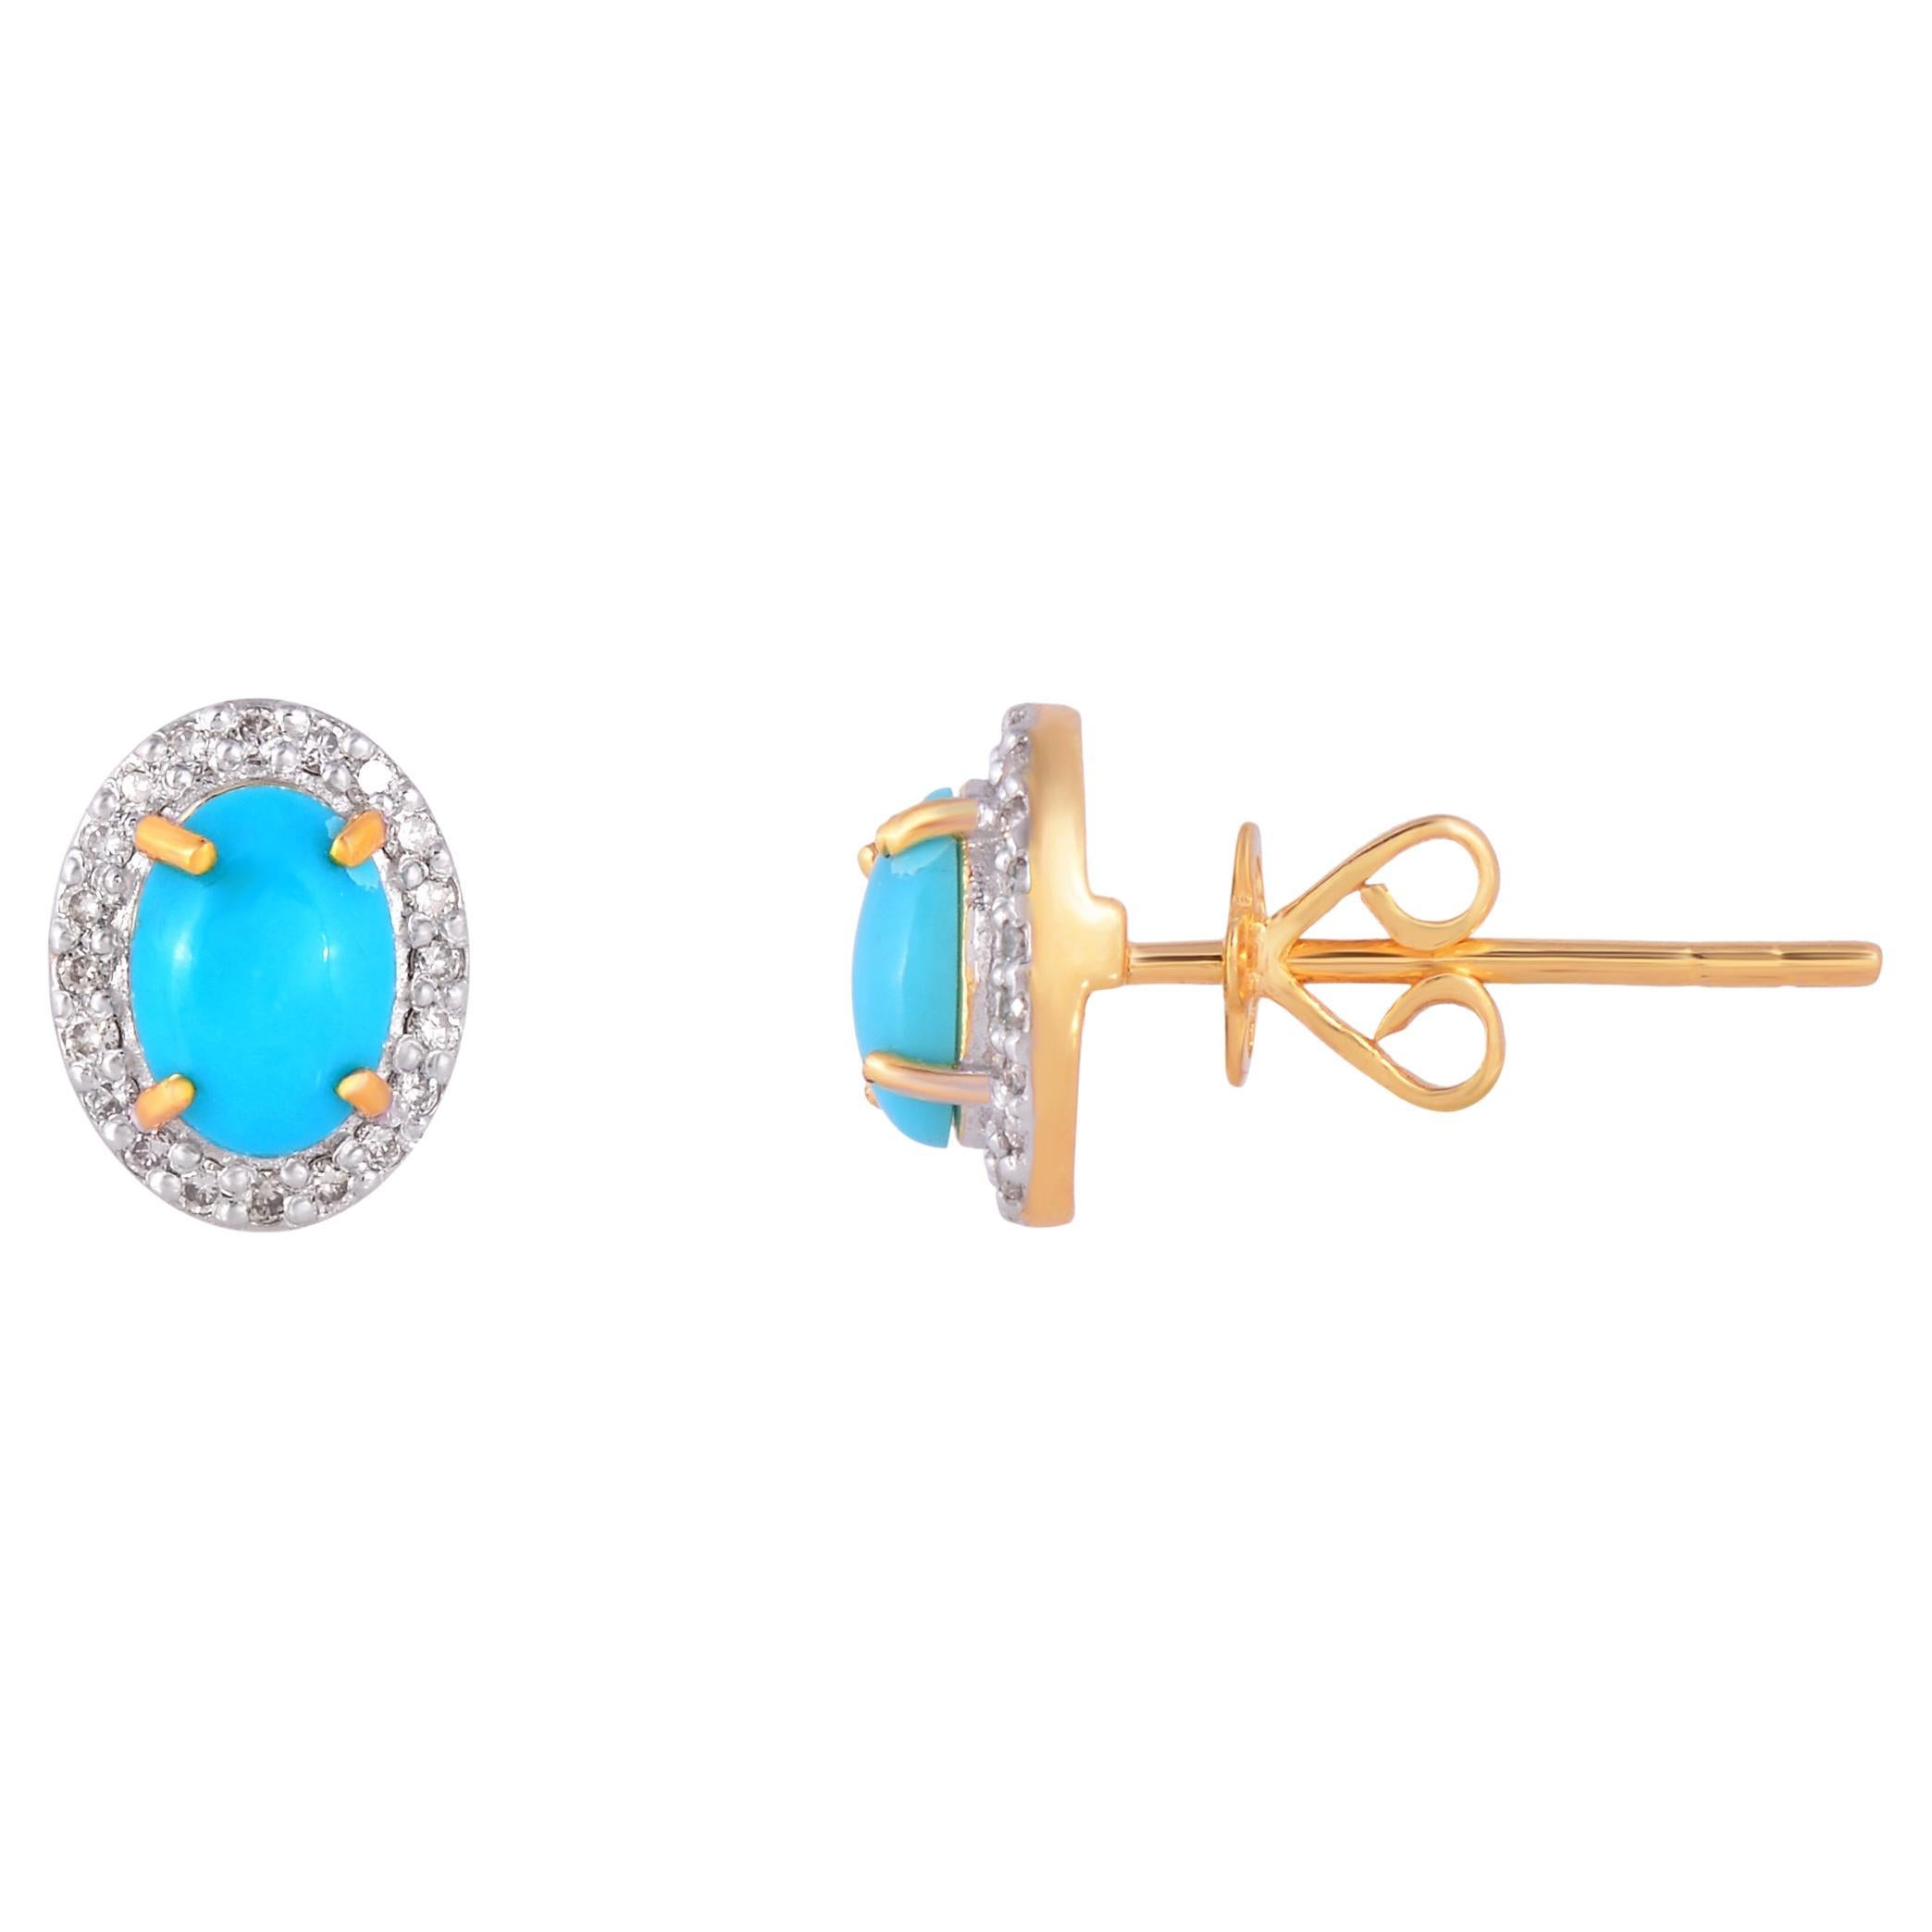 Turquoise Stud Earrings with Diamond in 18k Gold For Sale